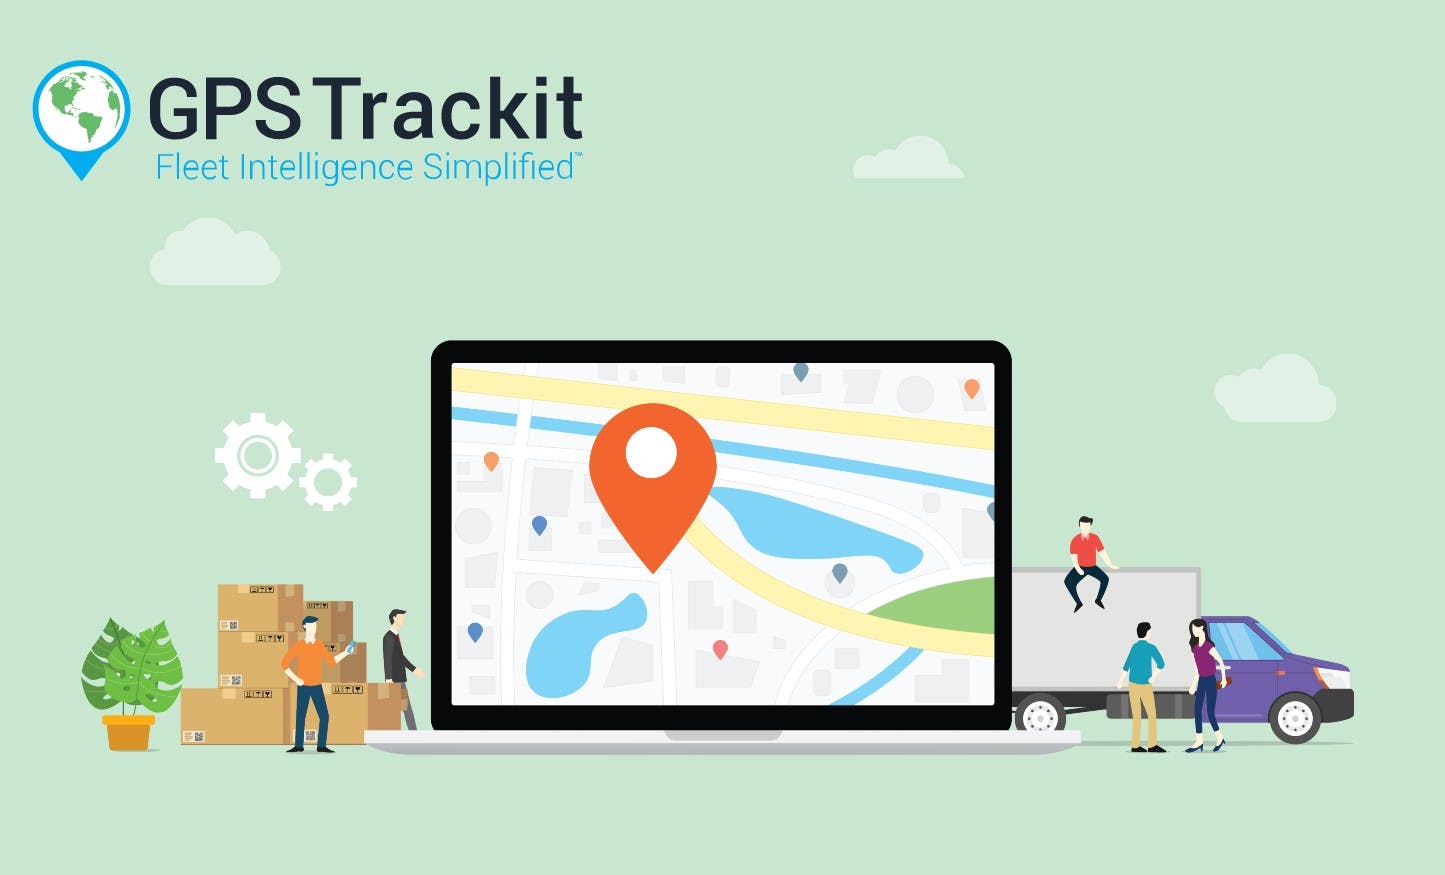 GPS Trackit Fleet Tracking Software: Review, Pros and Cons and Features